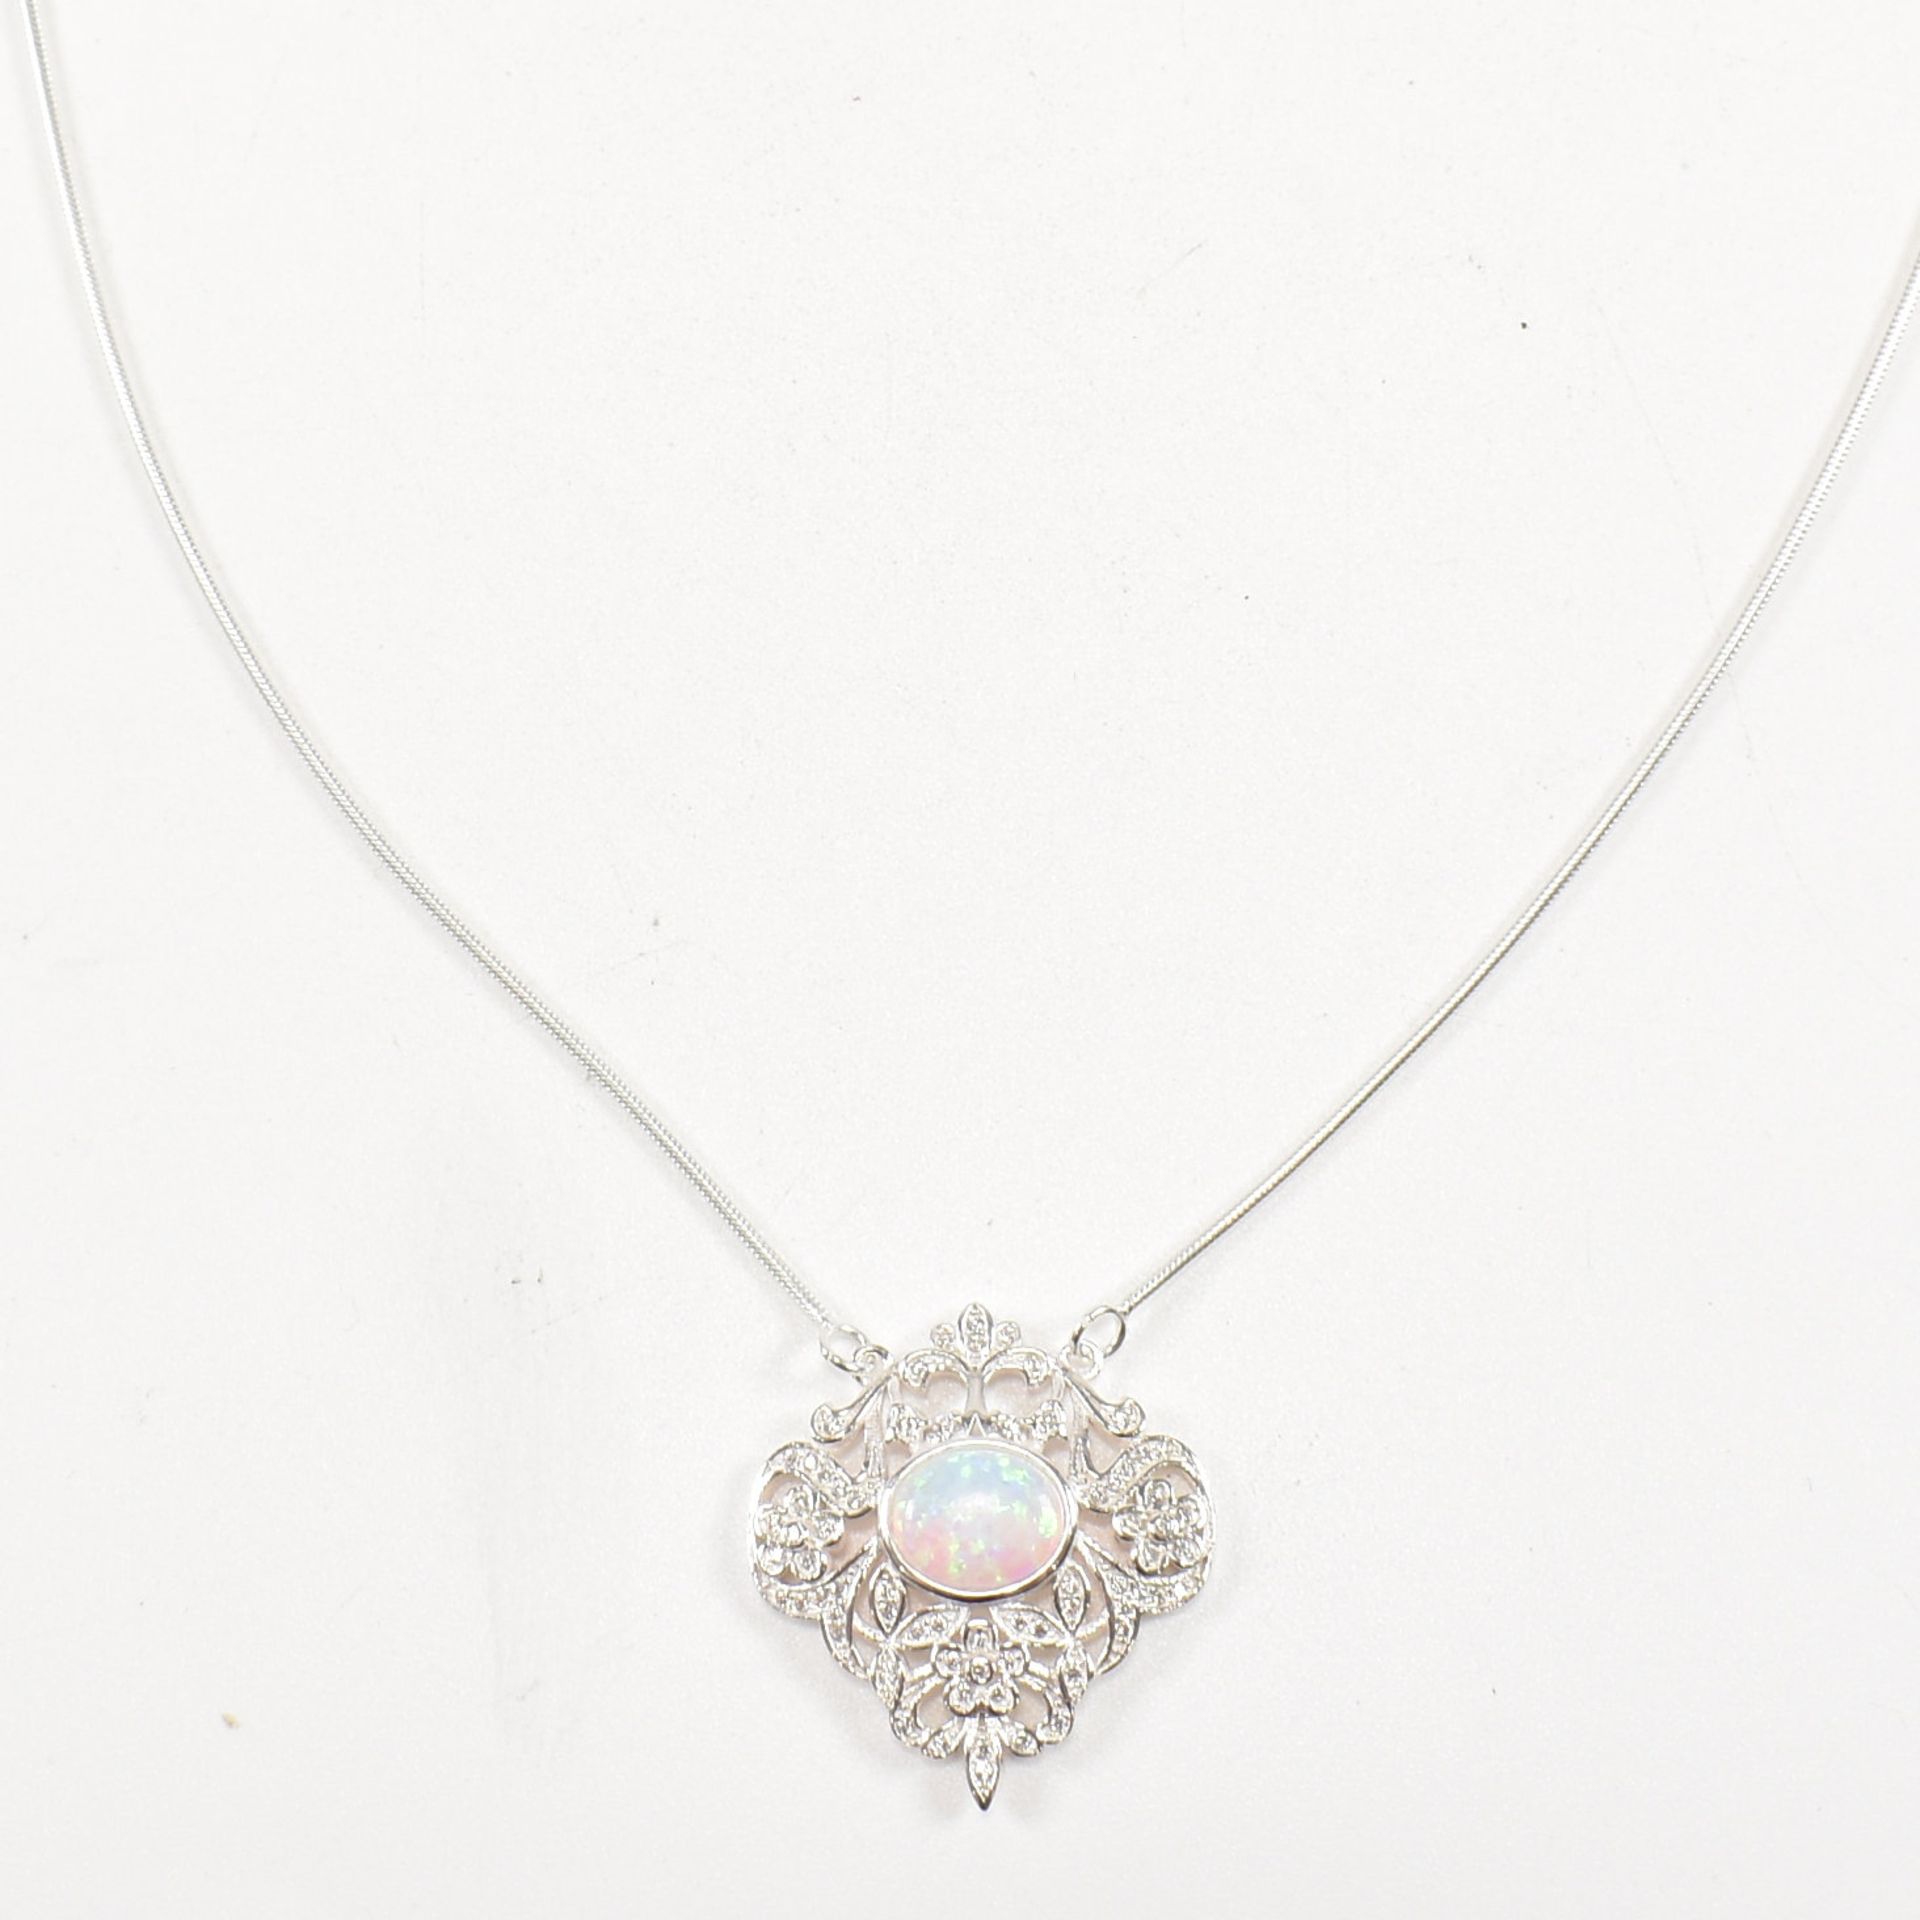 CONTEMPORARY SILVER CZ & OPALITE PENDANT NECKLACE - Image 3 of 5